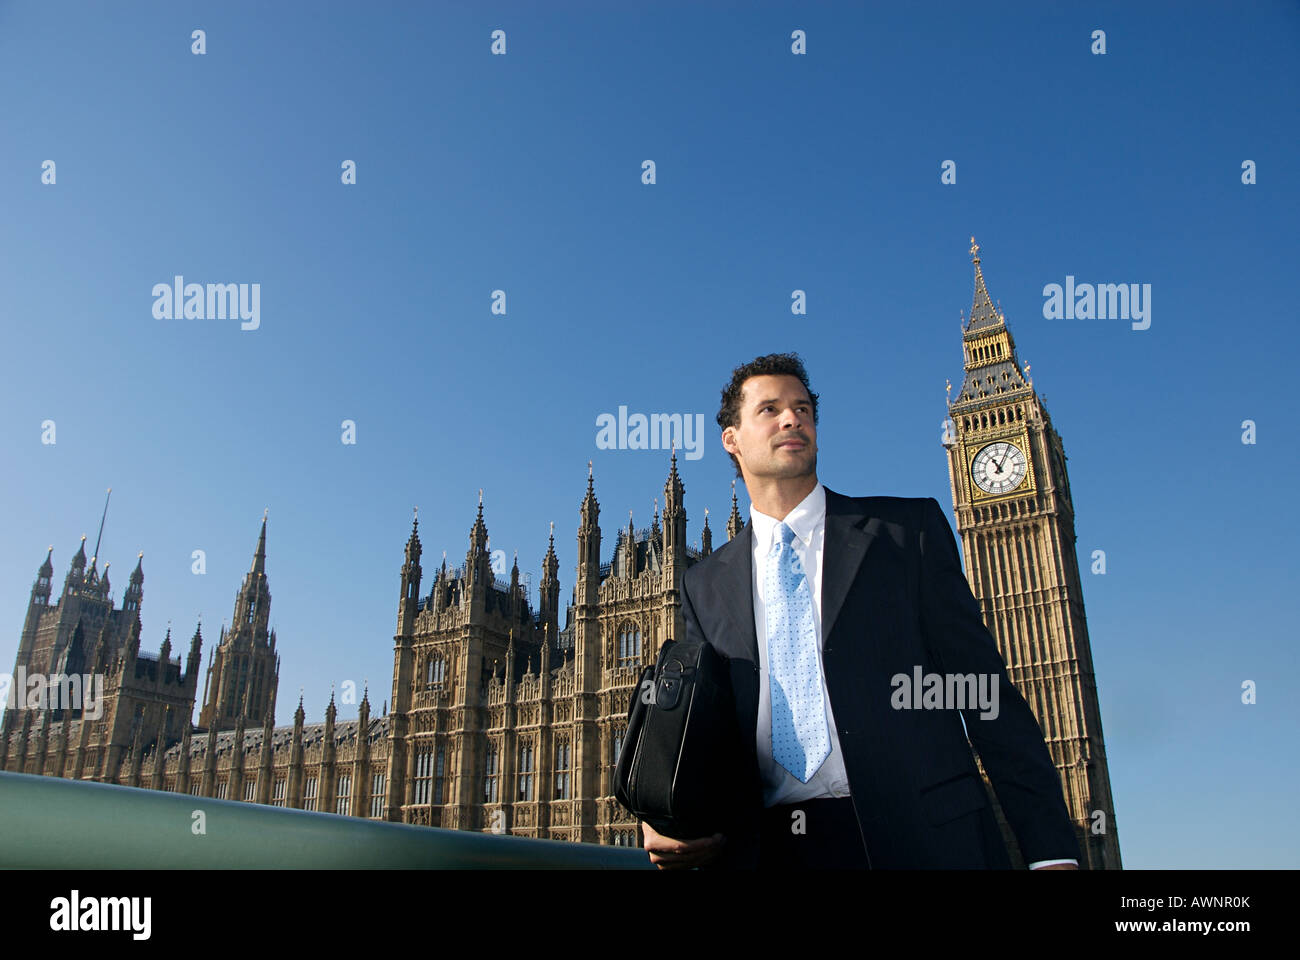 A businessman in front of the house of parliament Stock Photo